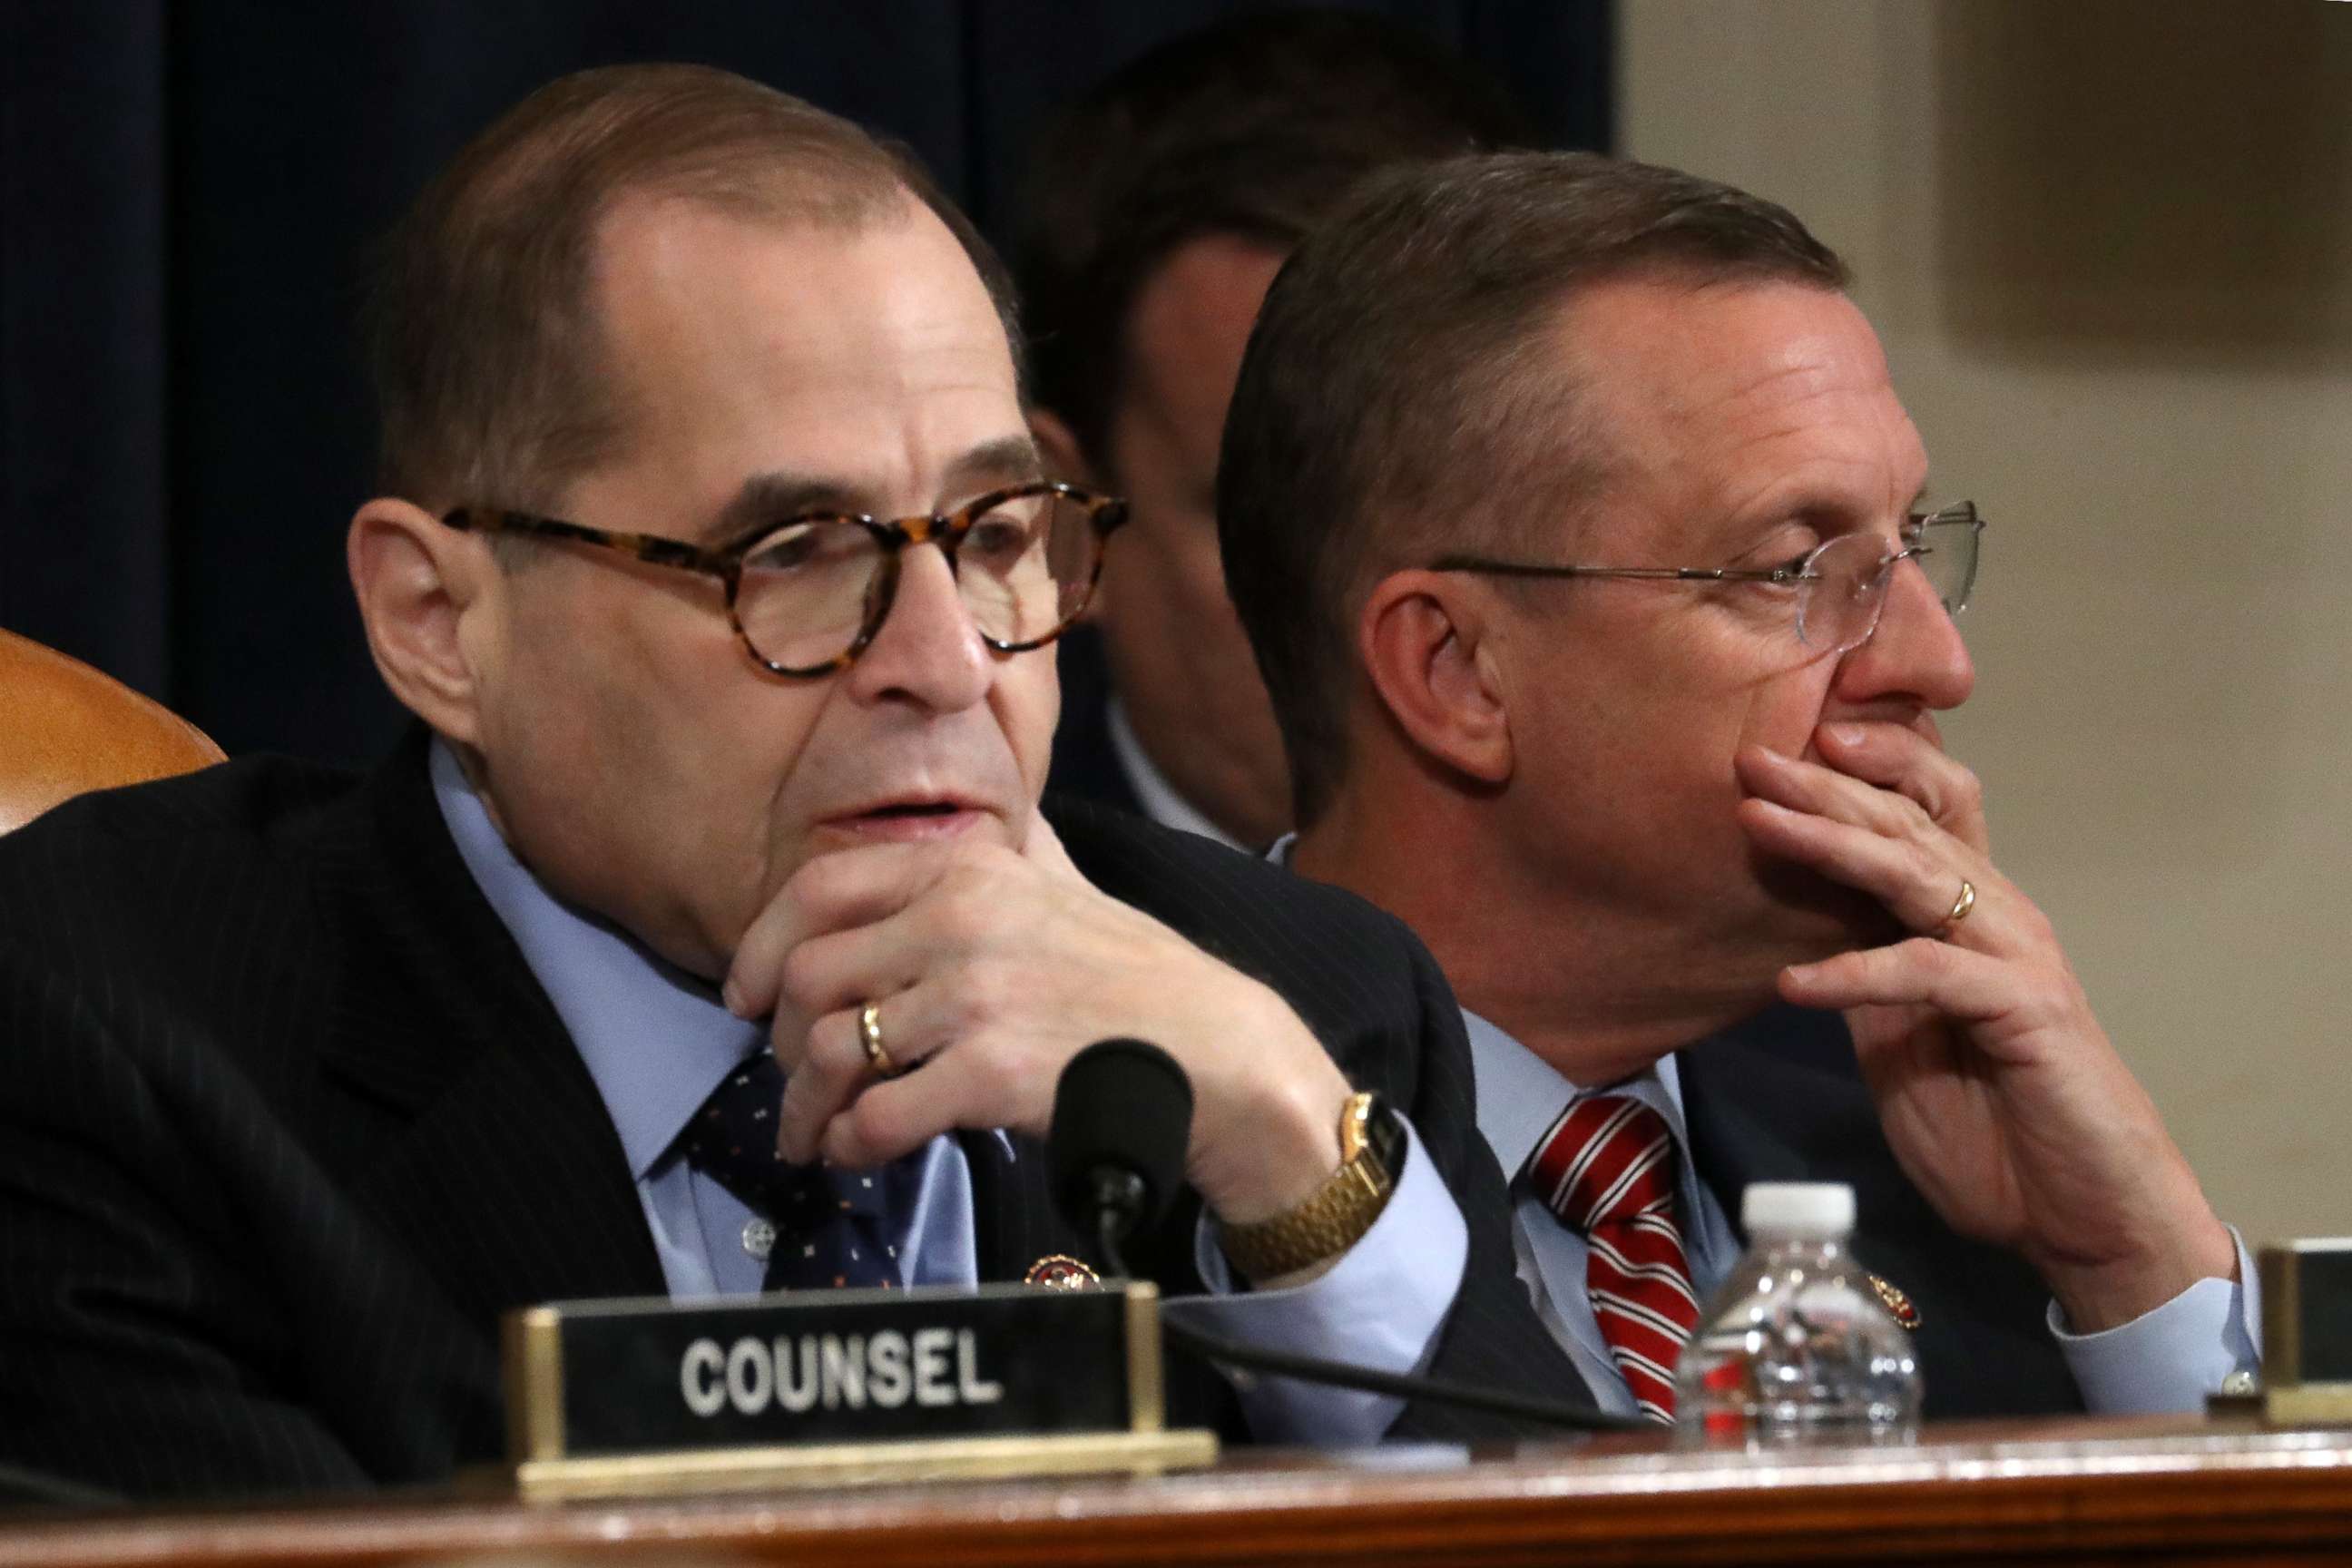 PHOTO: U.S. House Judiciary Committee Chairman Jerrold Nadler, D-N.Y., and ranking member Doug Collins, R-Ga., listen to opening statements during a hearing on articles of impeachment against President Donald Trump on Capitol Hill, Dec. 11, 2019. 